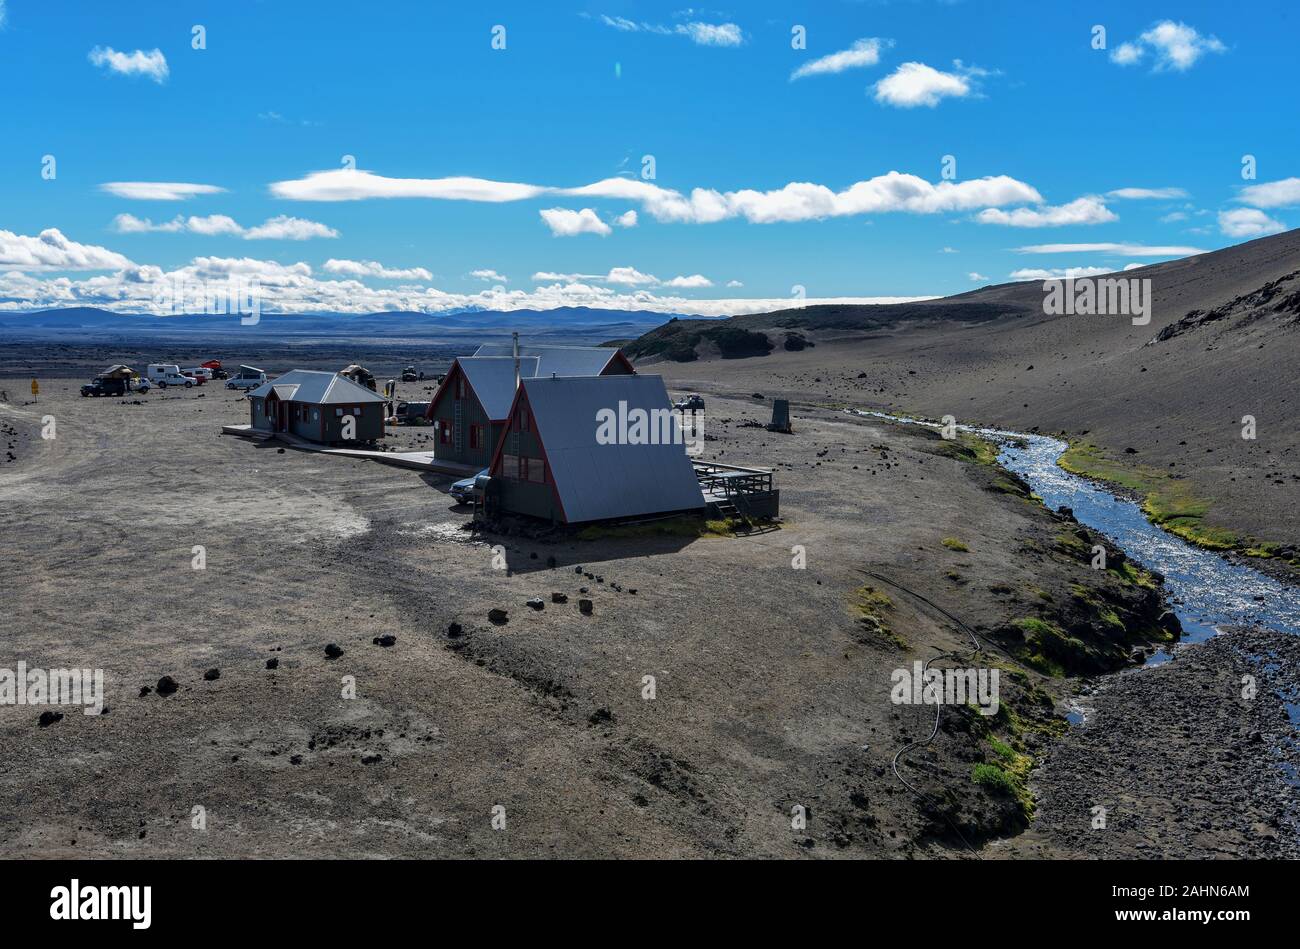 Dreki, Iceland - 15 July, 2018  Dreki Hut and Camping space close to Drekagil Canyon in Central Highlands of Iceland, Vatnajokull National Park. The l Stock Photo